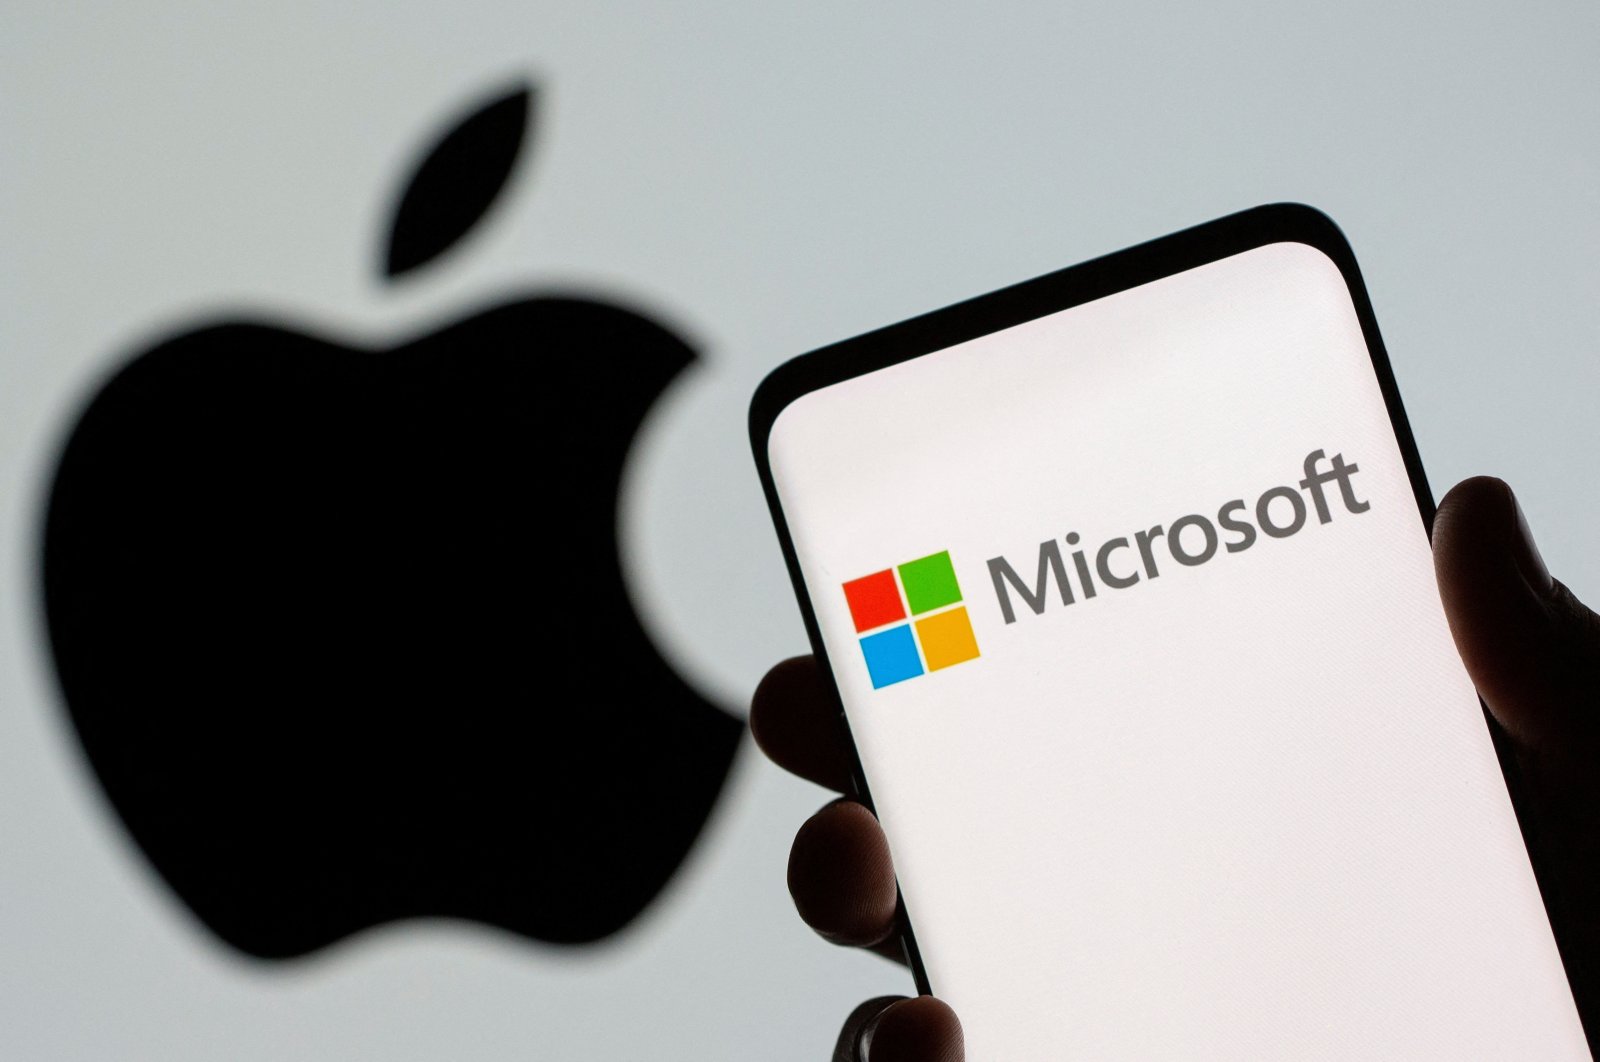 The Microsoft logo is seen on the smartphone in front of an Apple logo in this illustration taken on July 26, 2021. (Reuters Photo)